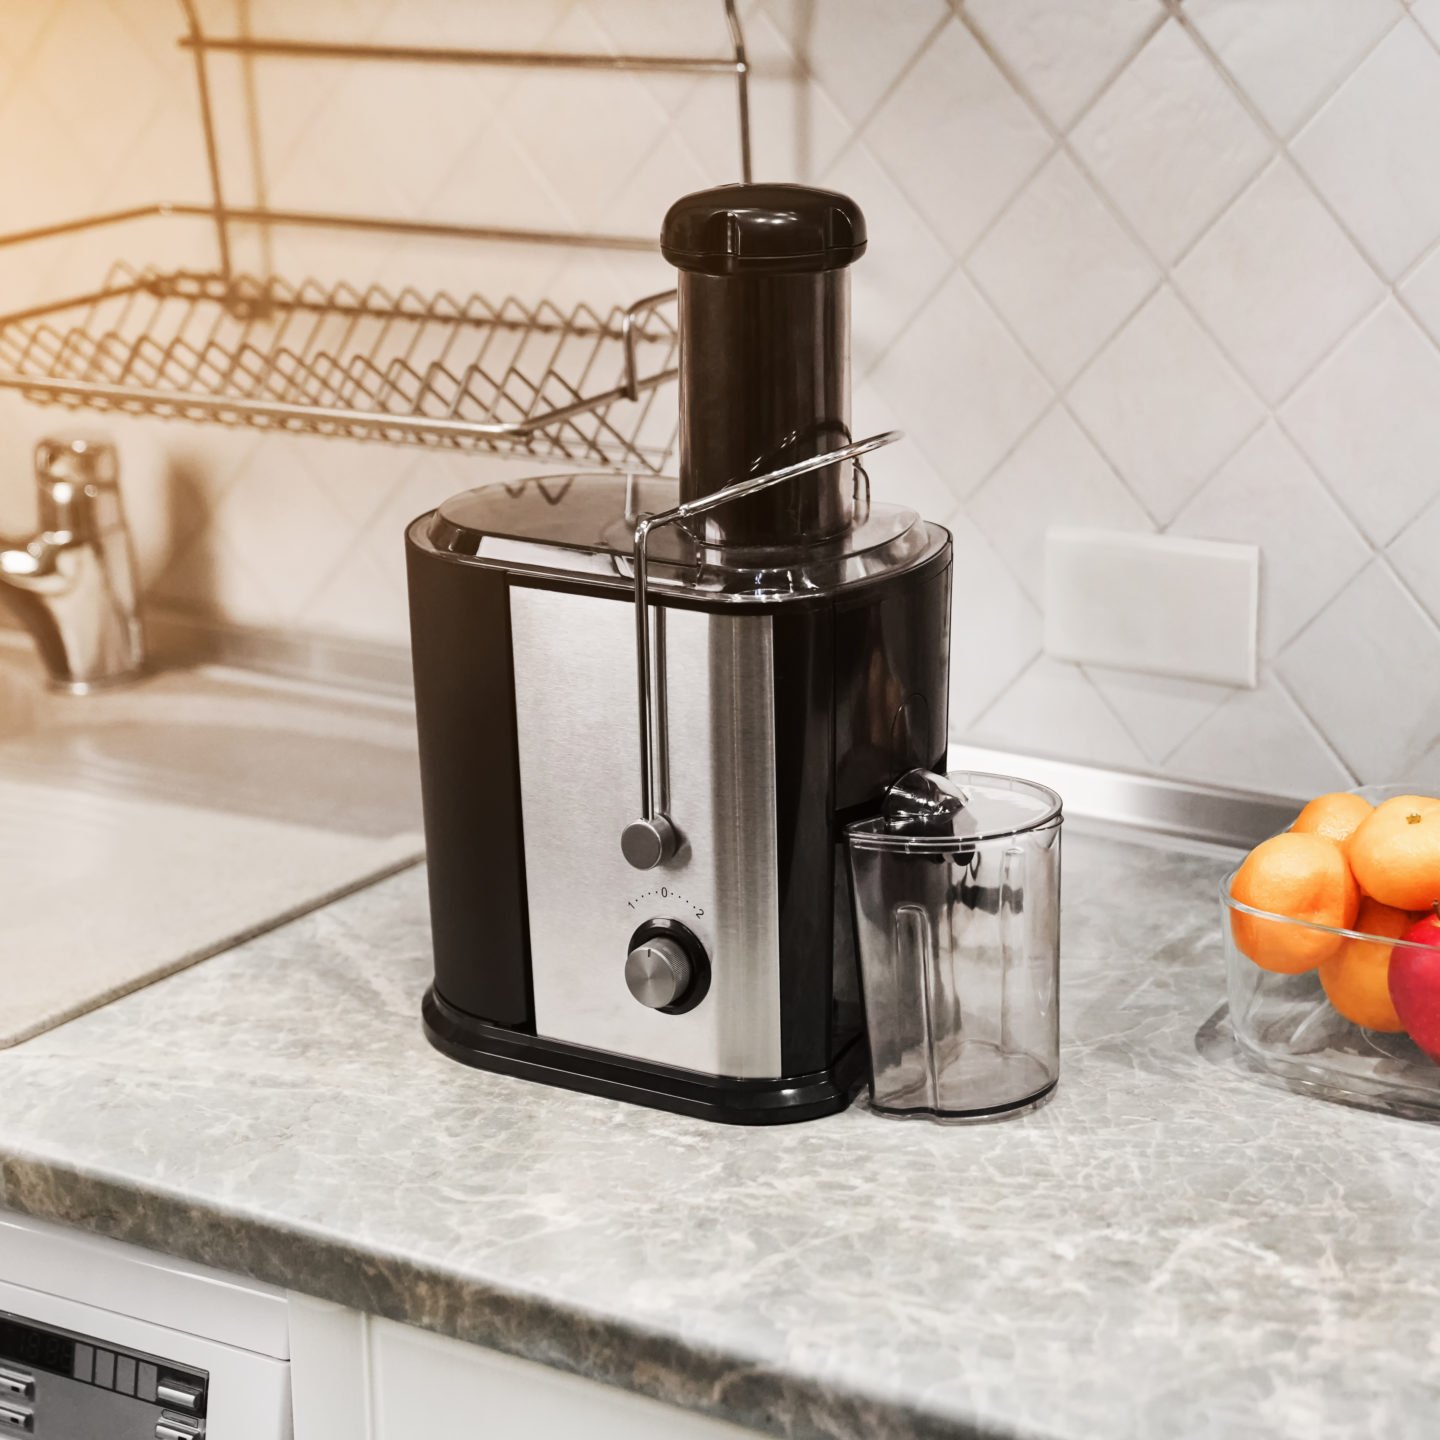 Grant Establish Deformation Top 10 Best Budget Juicers To Buy In 2022: A Review and Buying Guide -  Tastylicious